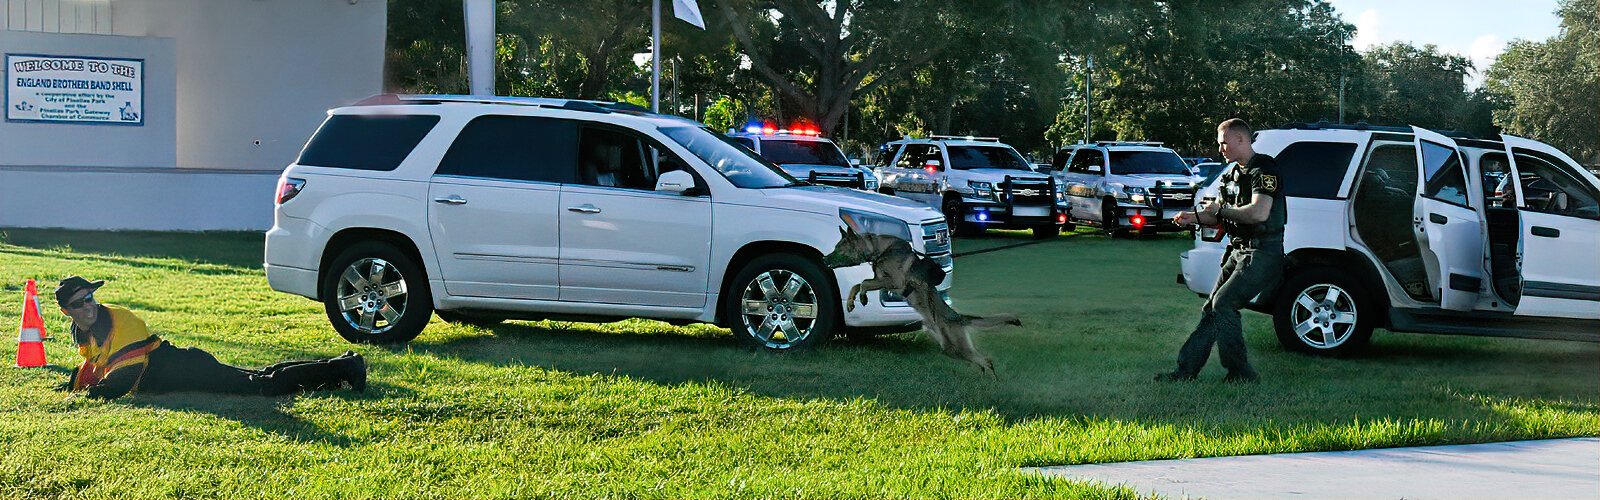 A scenario involving cars and a criminal suspect plays out at the K-9 graduation ceremony. 